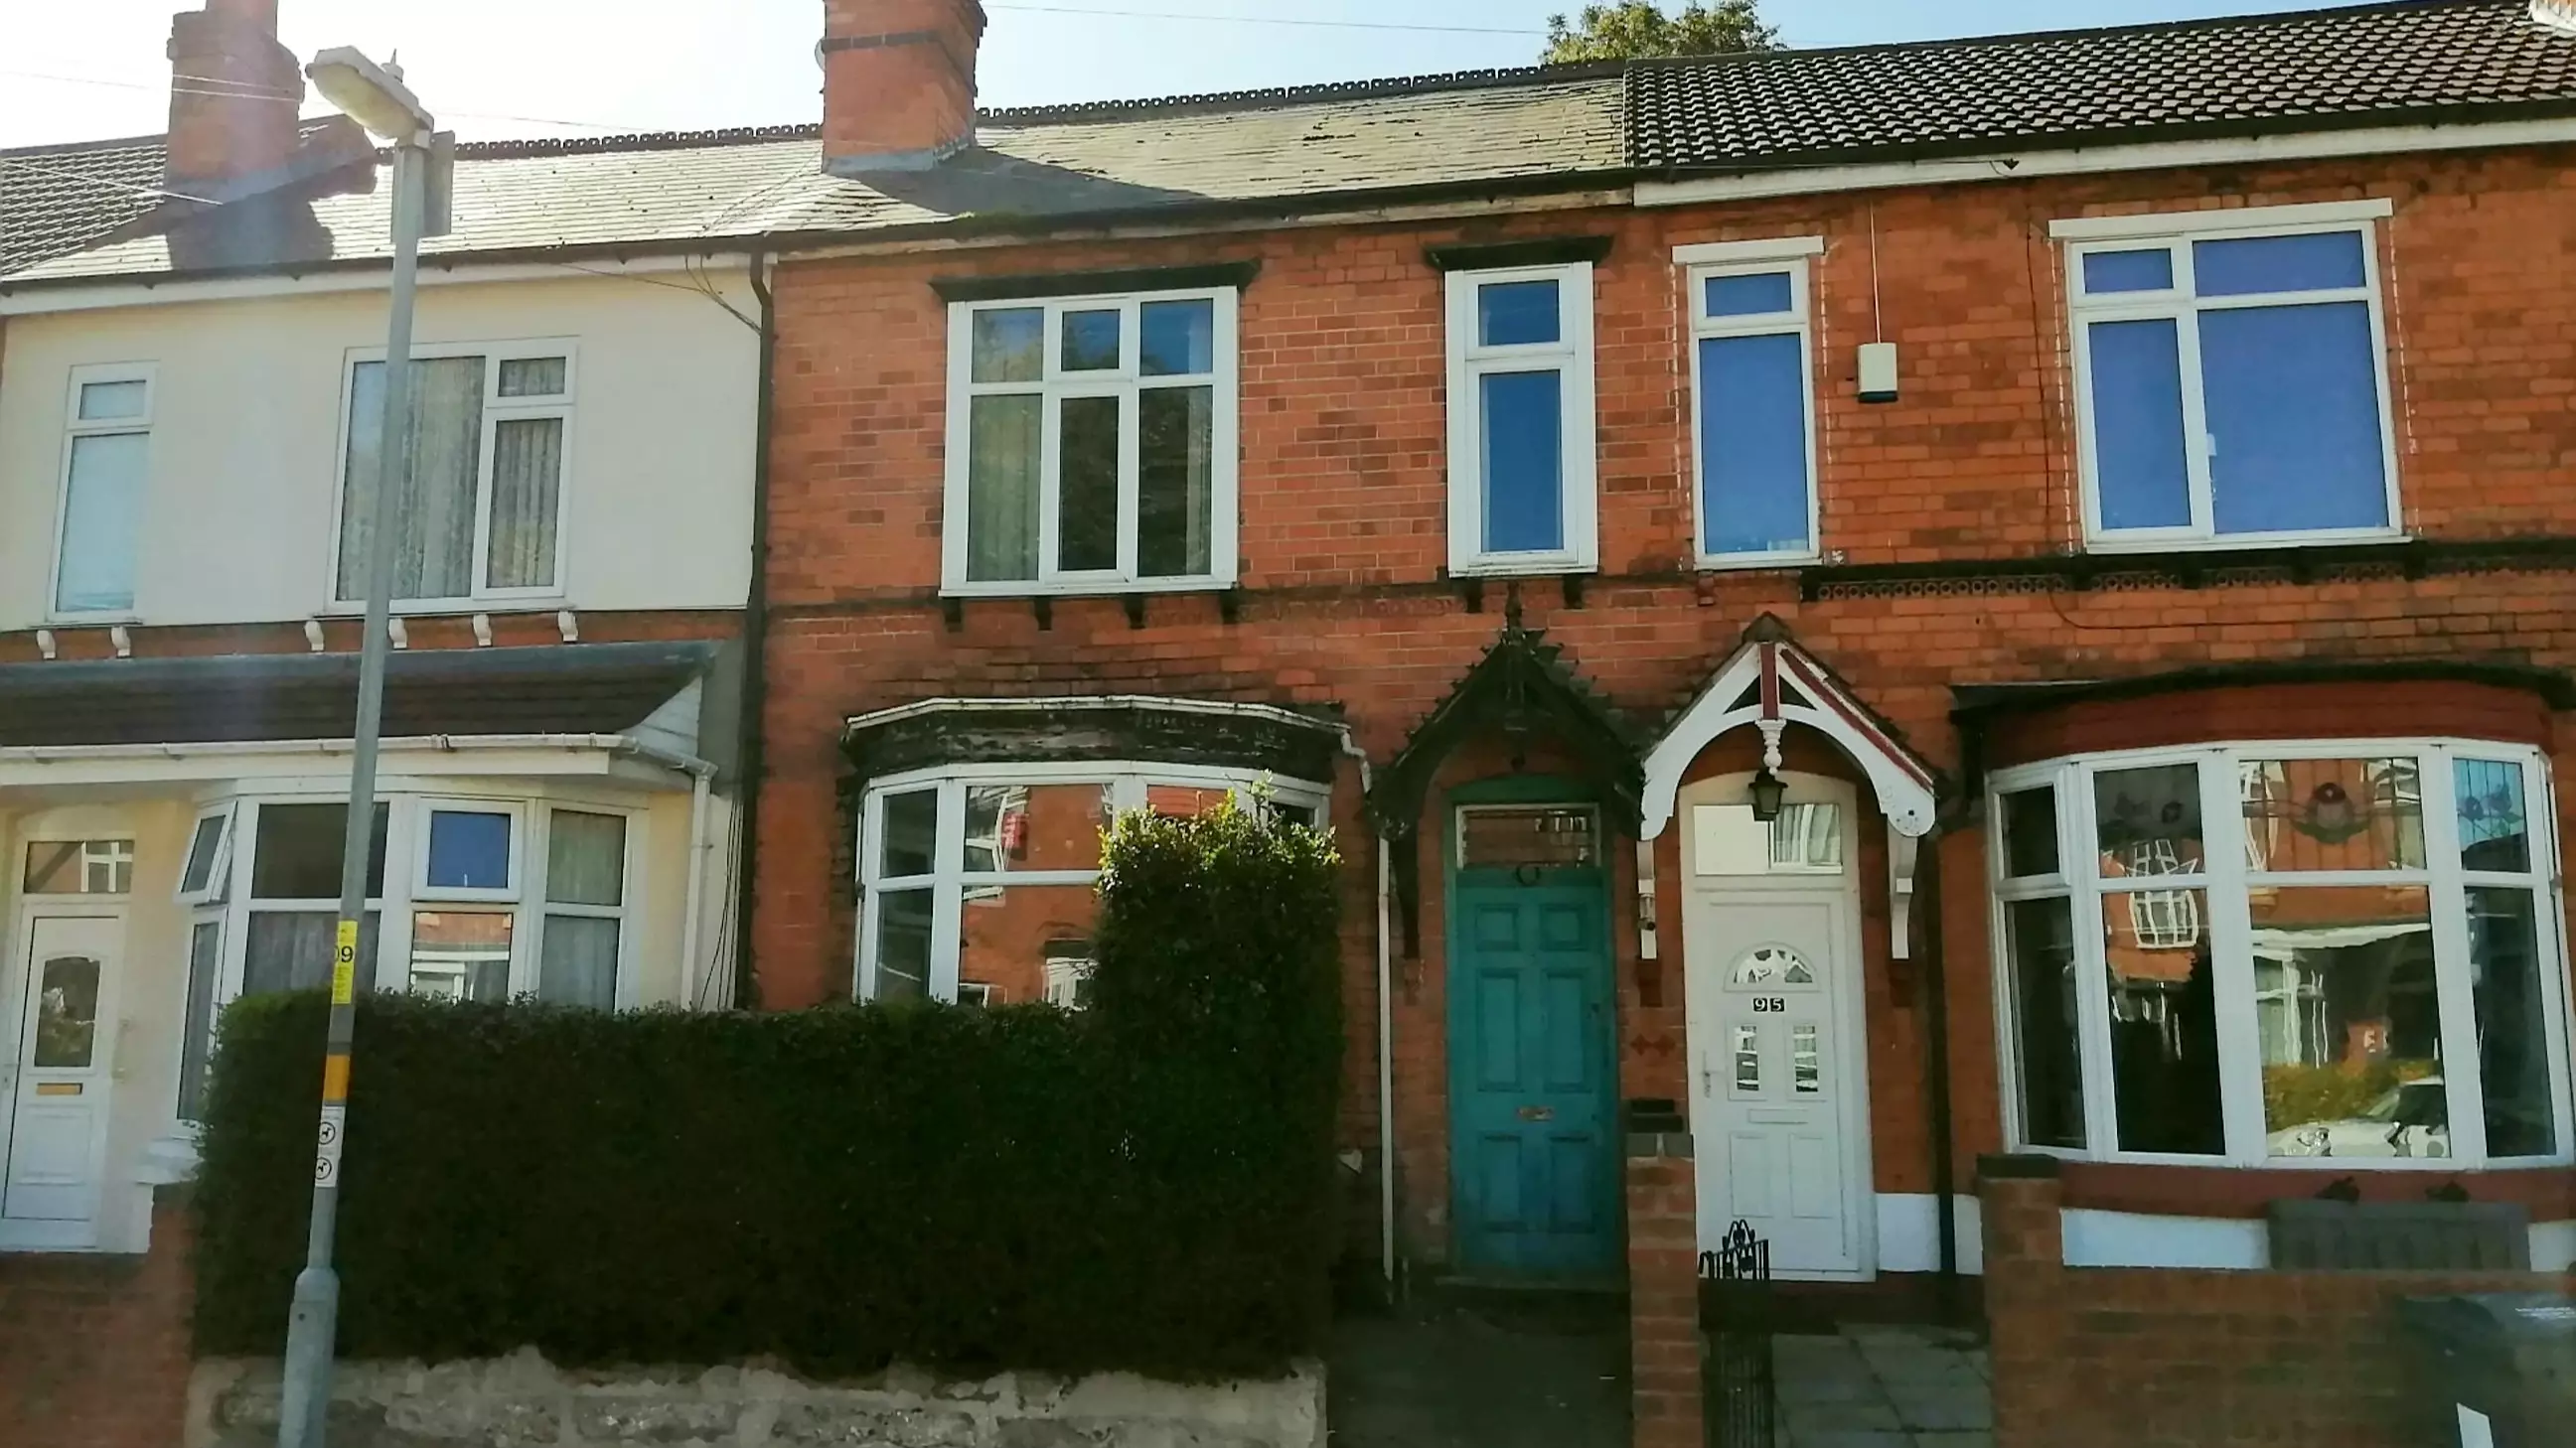 This Three-Bed Terraced House Is Being Auctioned For Just £1 – But There's A Catch